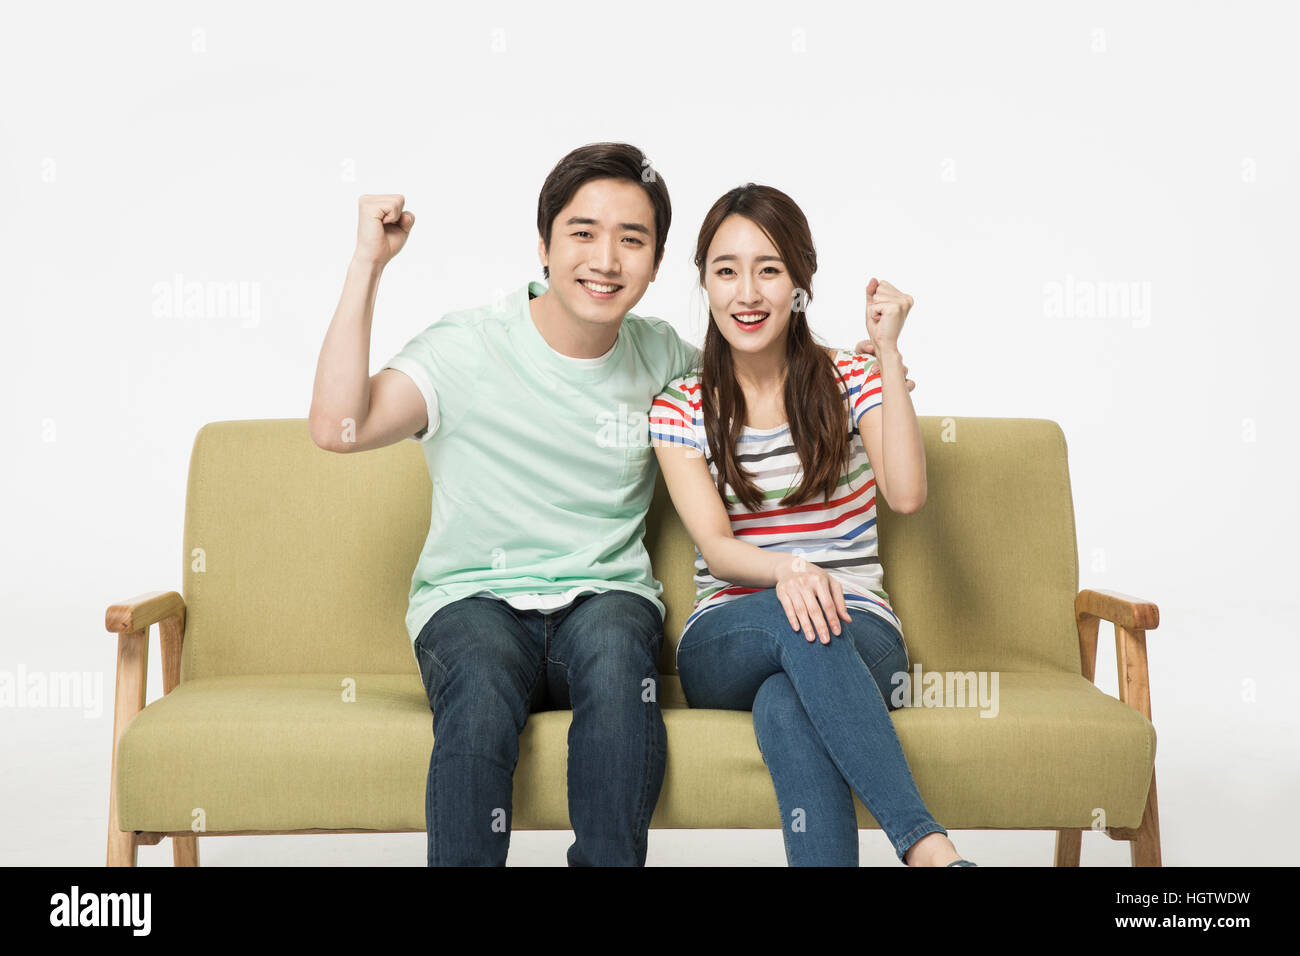 Young smiling couple cheering watching a game on TV Stock Photo